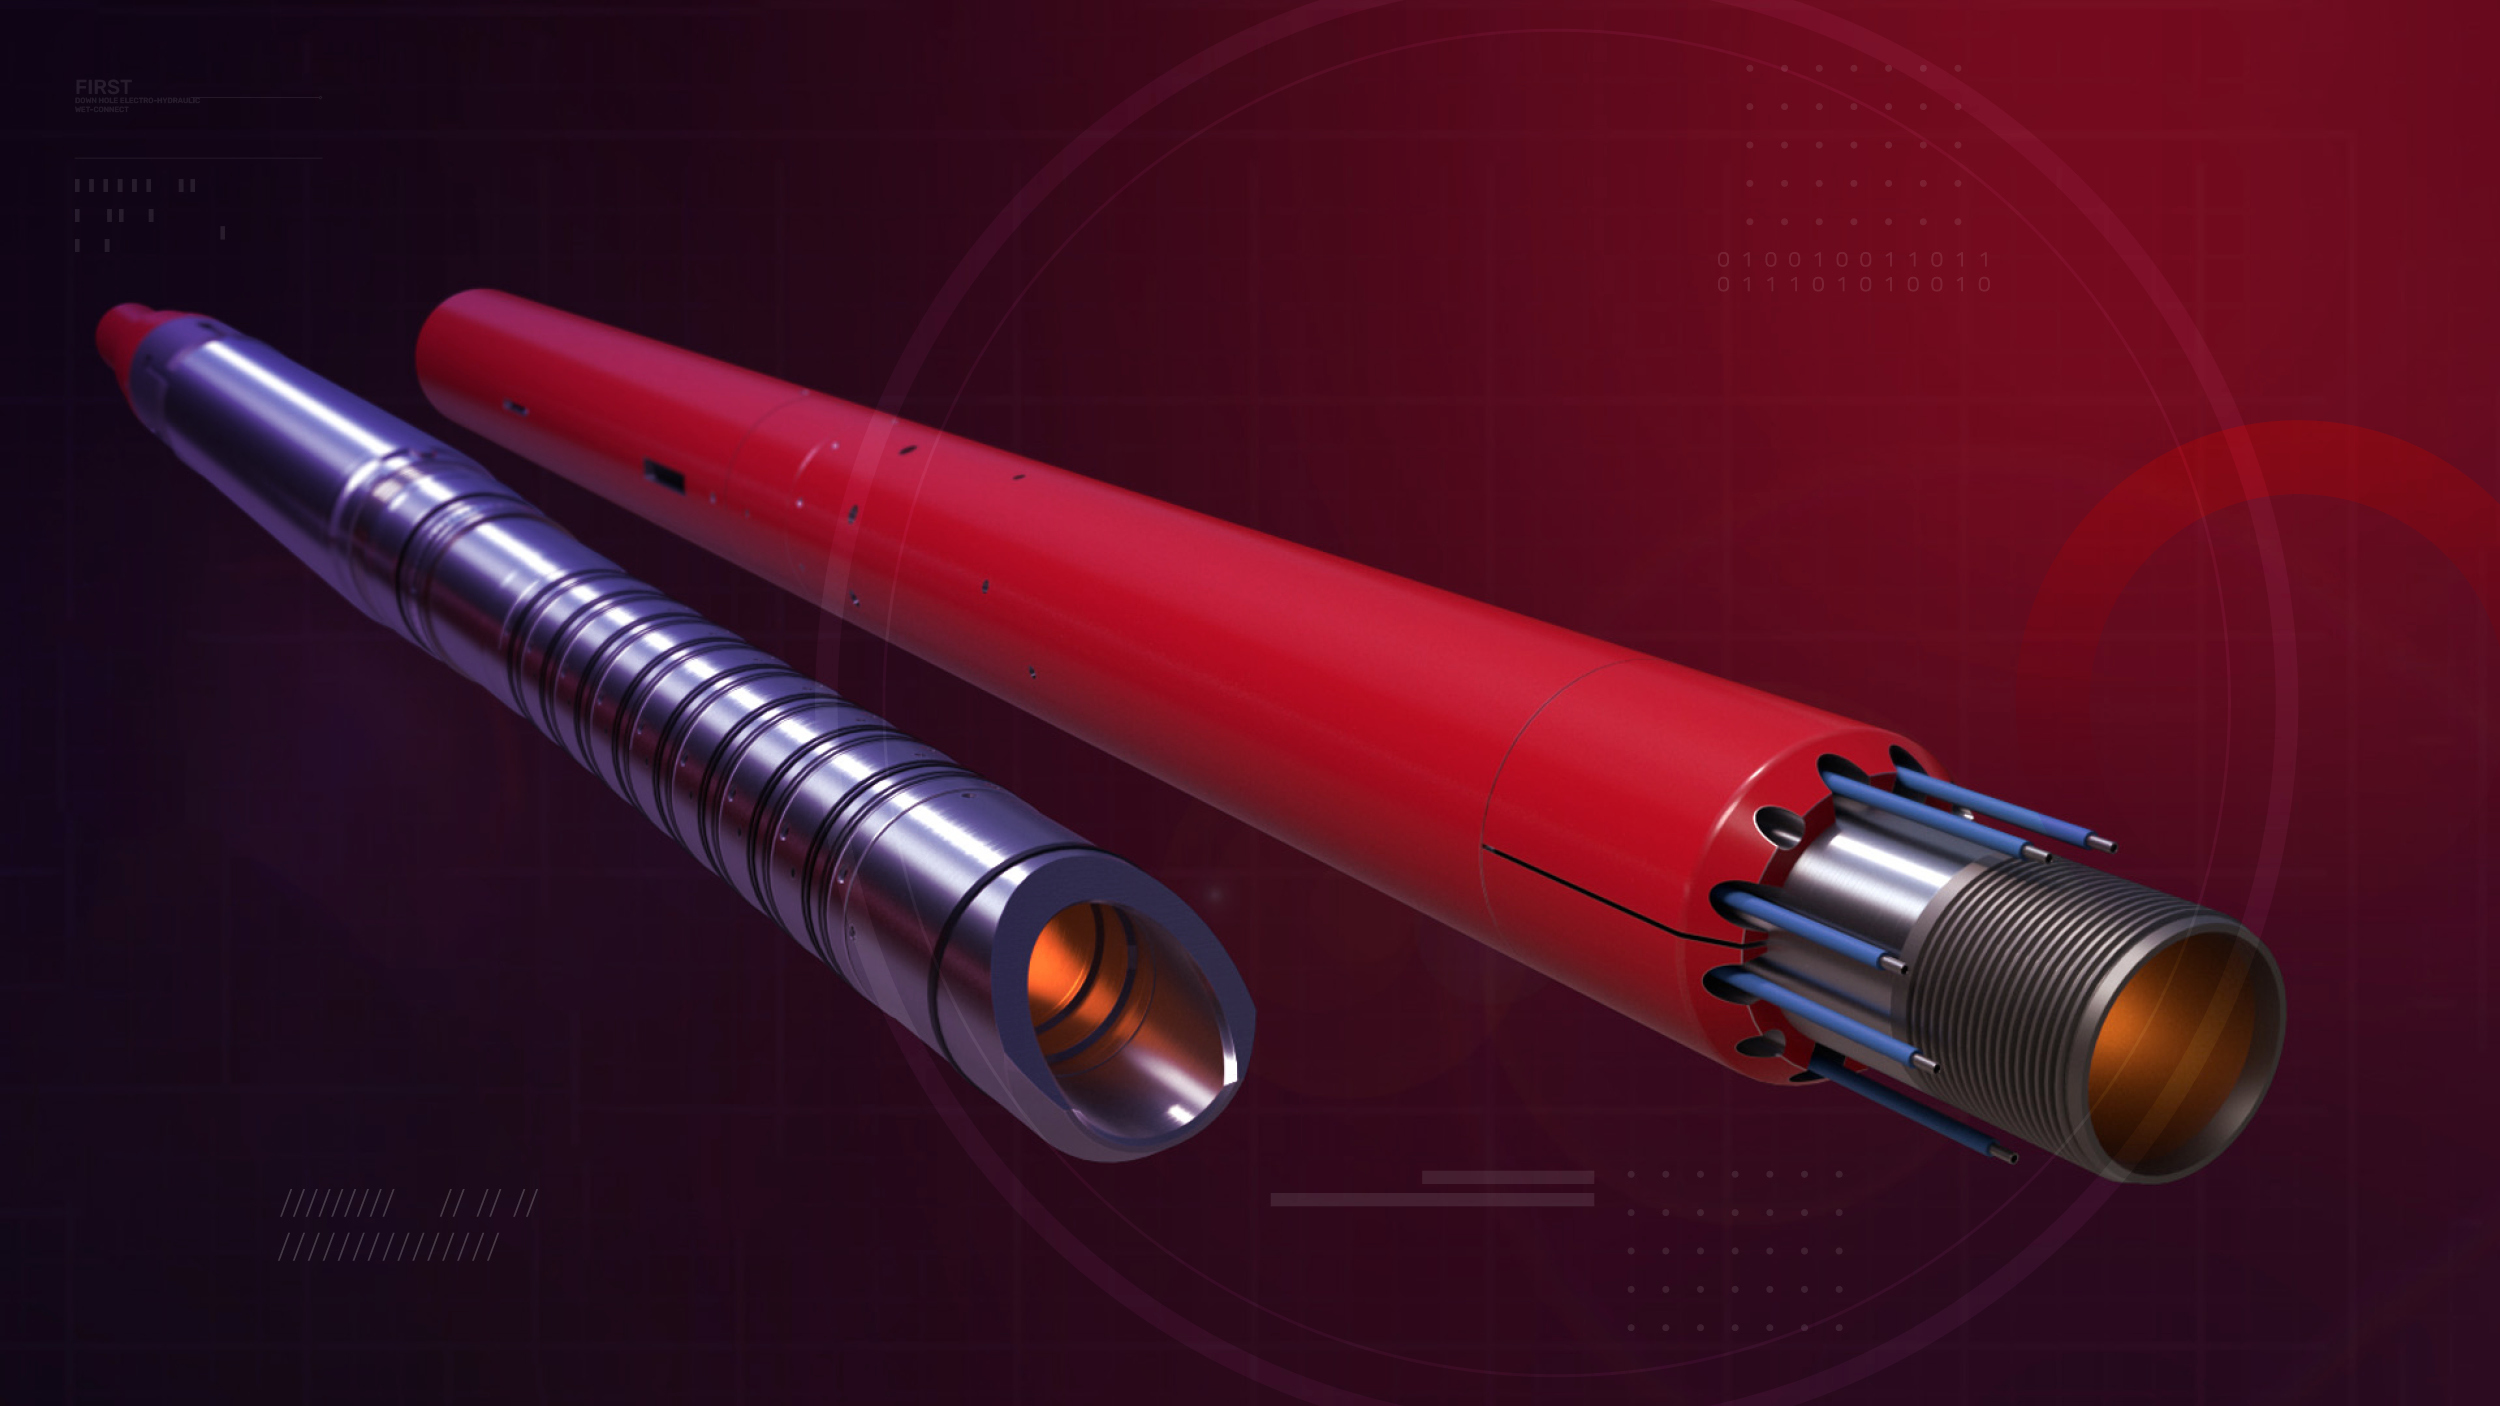 Halliburton Installs First Downhole Electro-Hydraulic Wet-Connect in Deepwater Brazil